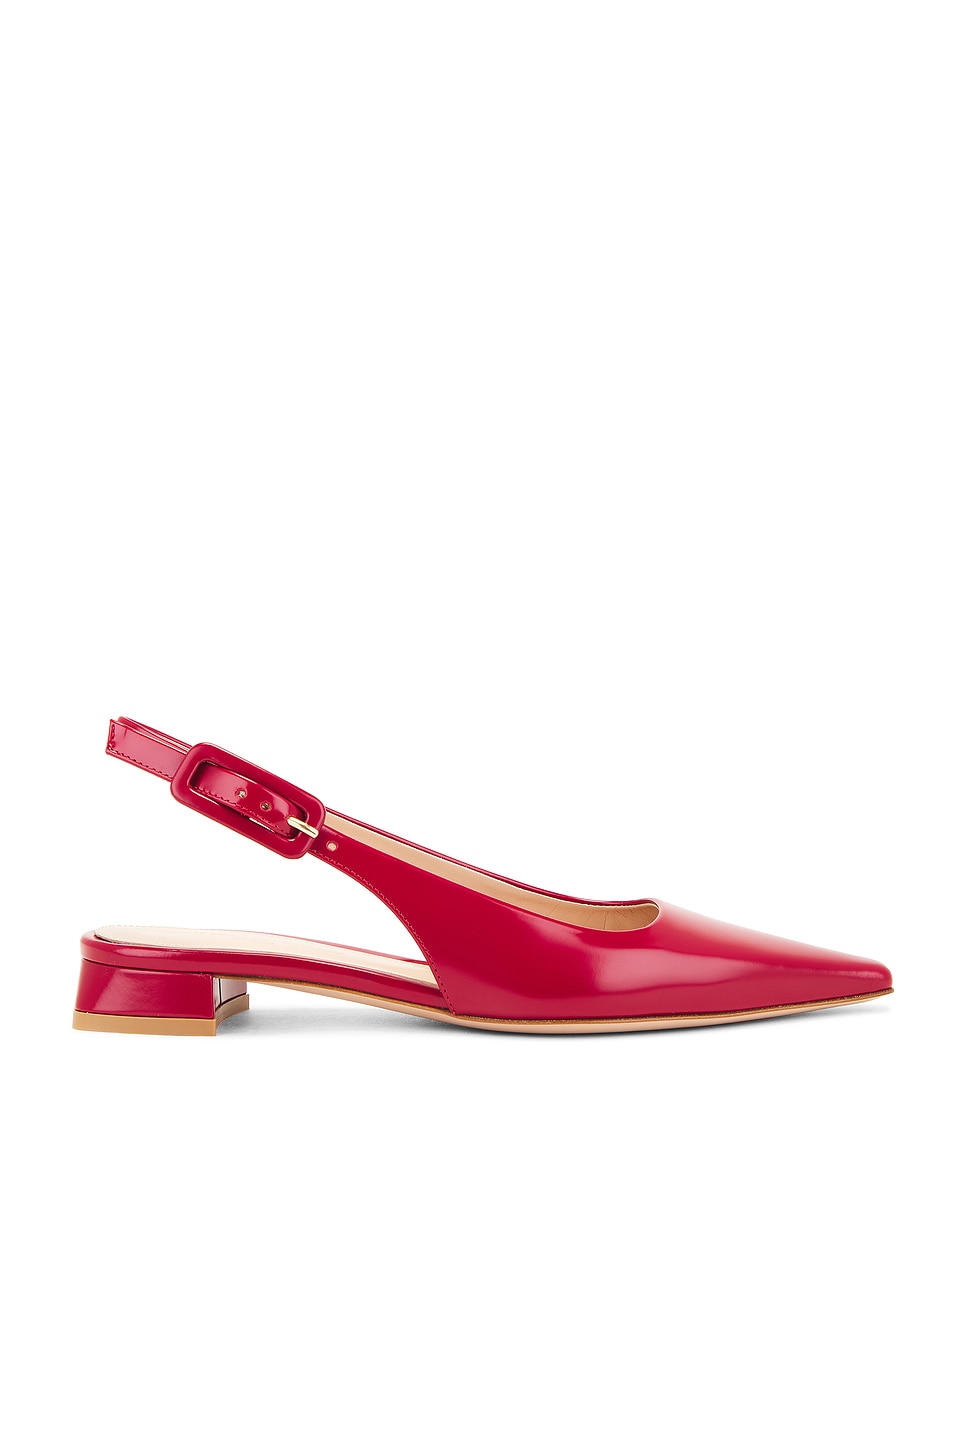 Image 1 of Gianvito Rossi Tokio Slingback Flat in Rouge